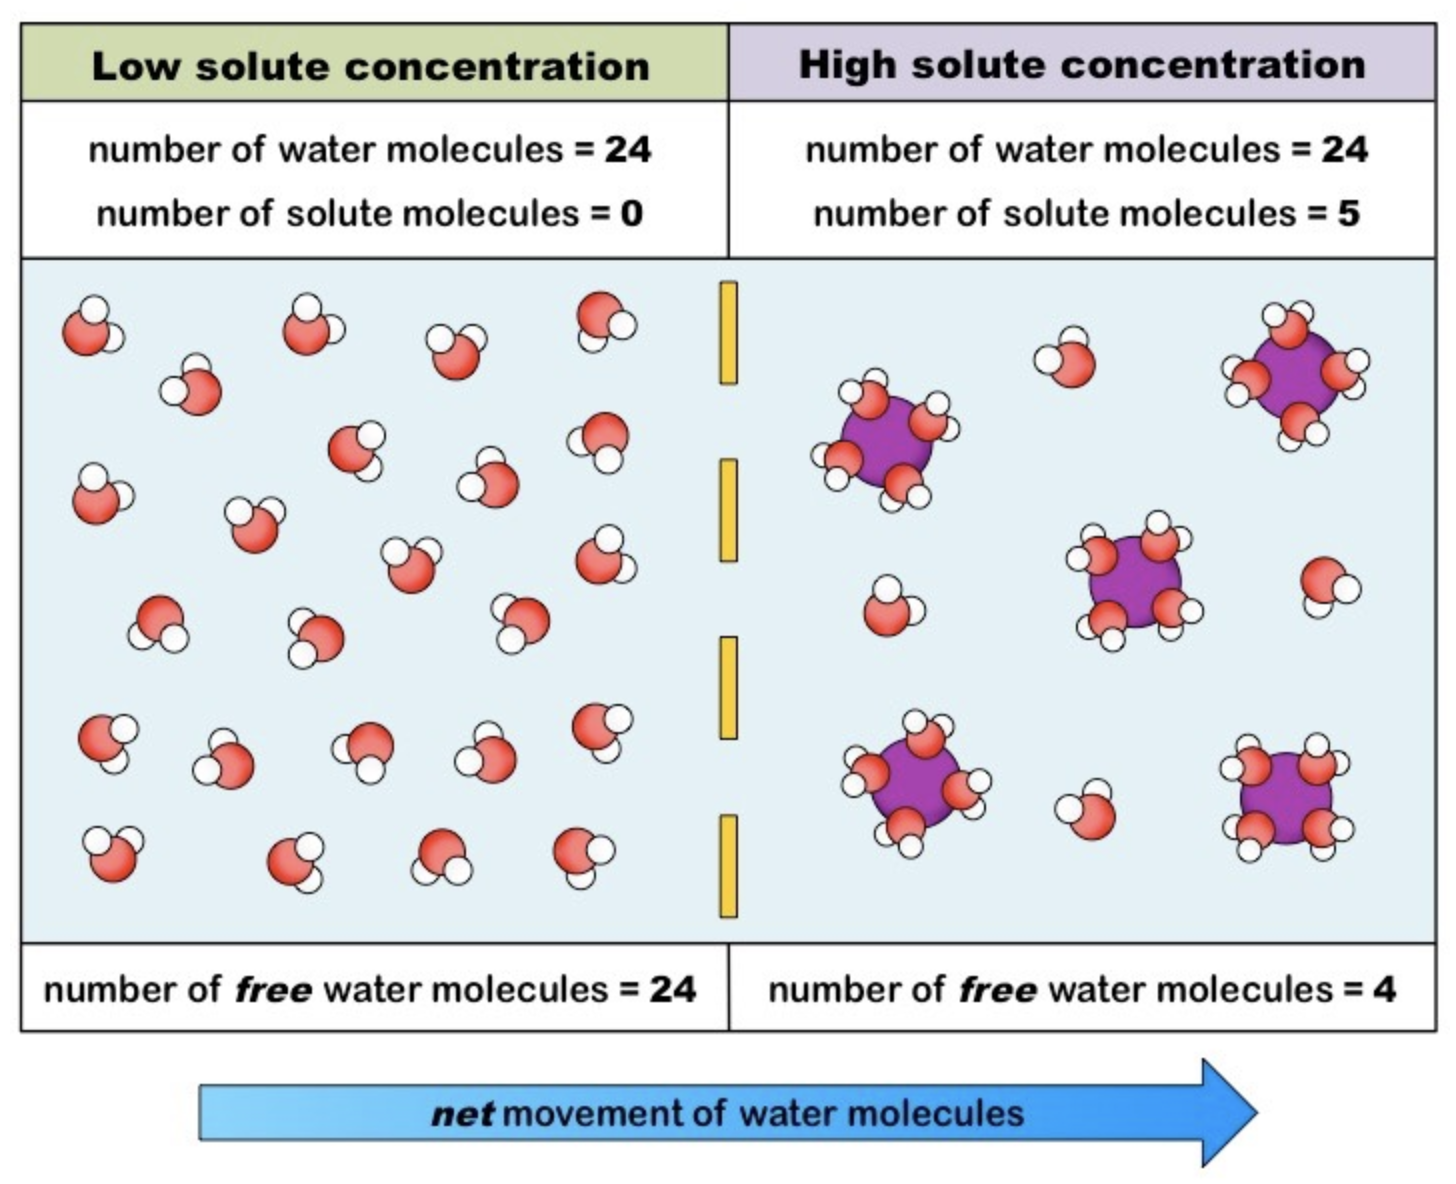 <p><strong>Osmosis -</strong> net movement of <u>water</u> molecules across a <em>semi-permeable</em> membrane from a region of<em> low solute</em> concentration to a region of <em>high solute</em> concentration (until equilibrium is reached).</p><ul><li><p>Water is <em>universal solvent</em></p><ul><li><p>Will associate with and dissolve polar or charged molecules (solutes)</p></li></ul></li><li><p>Because solutes cannot cross a cell membrane unaided, water moved to equalise the two solutions </p></li><li><p>Higher solute concentration = less free water molecules in solution</p></li><li><p><strong>Osmosis is essentially the diffusion of <u>free</u> water molecules and hence occurs from regions of low solute concentration.</strong></p></li></ul>